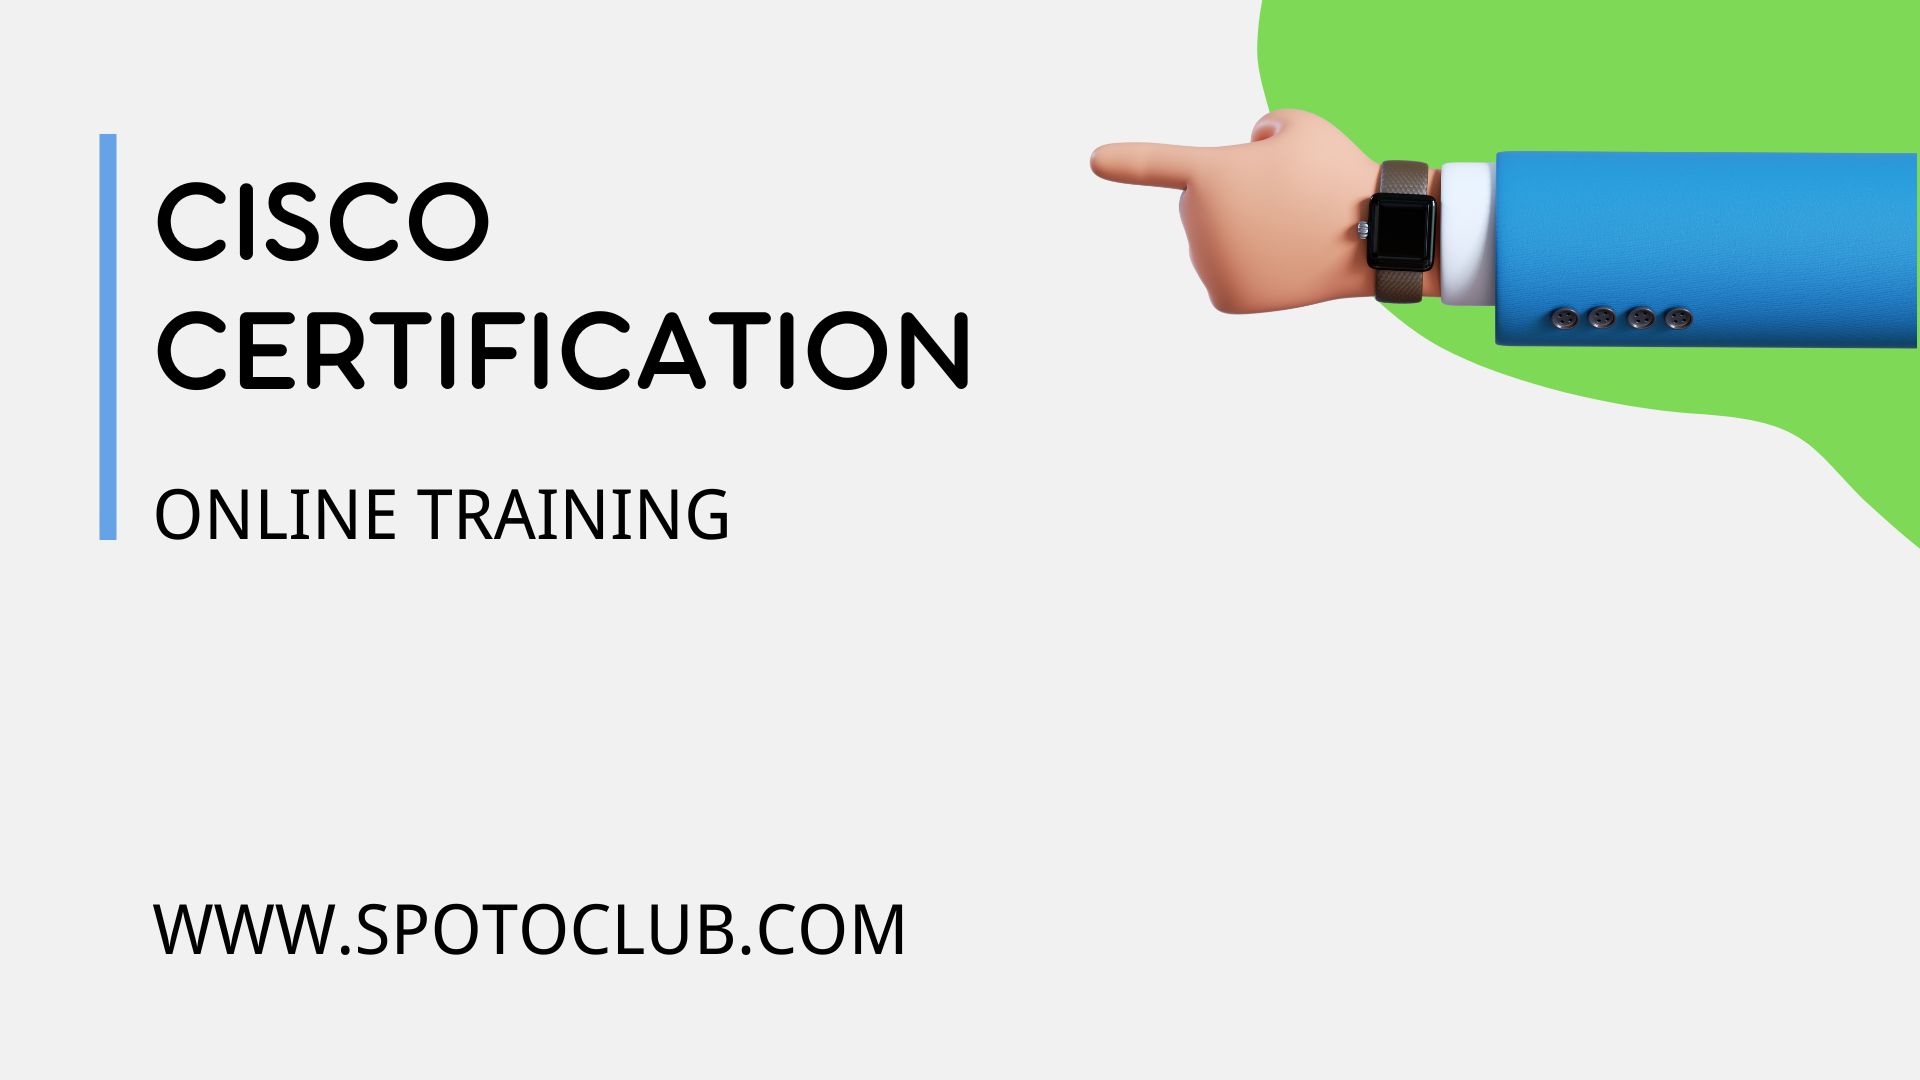 Duration and Recertification